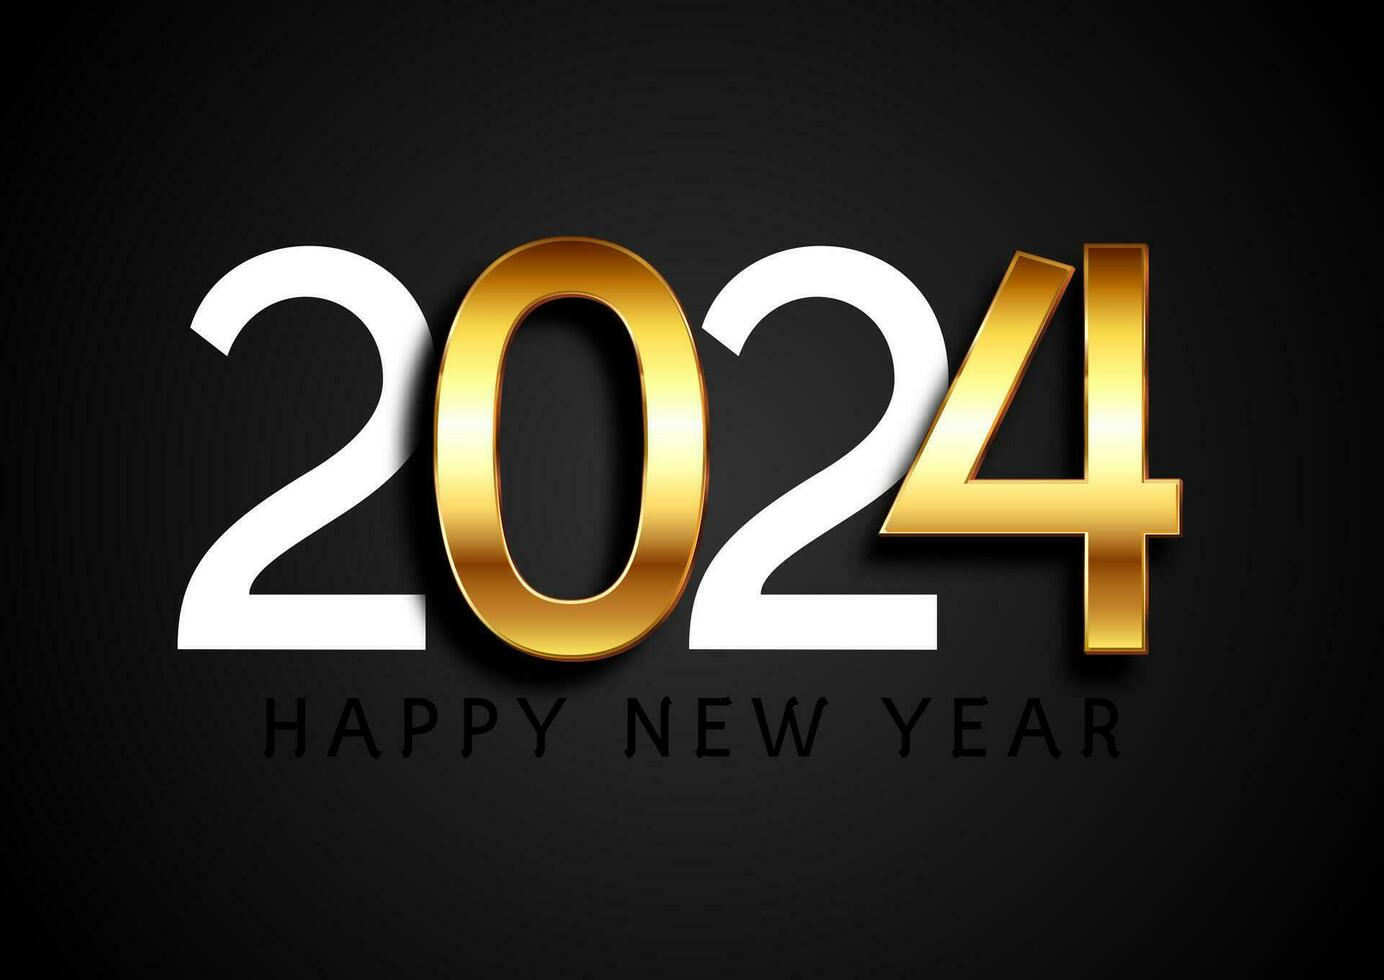 Elegant Happy New Year background with gold and white numbers design vector